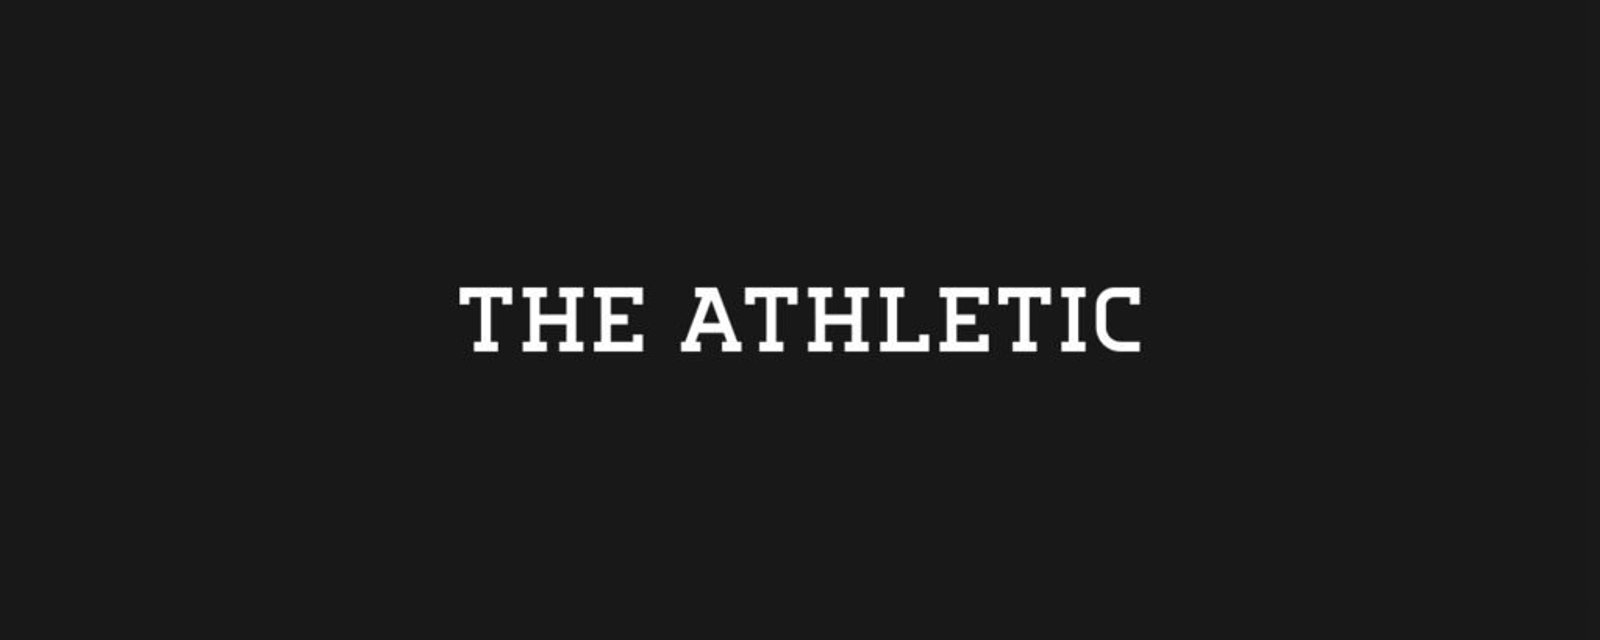 The Athletic forced to make cuts, NHL insiders lose jobs 